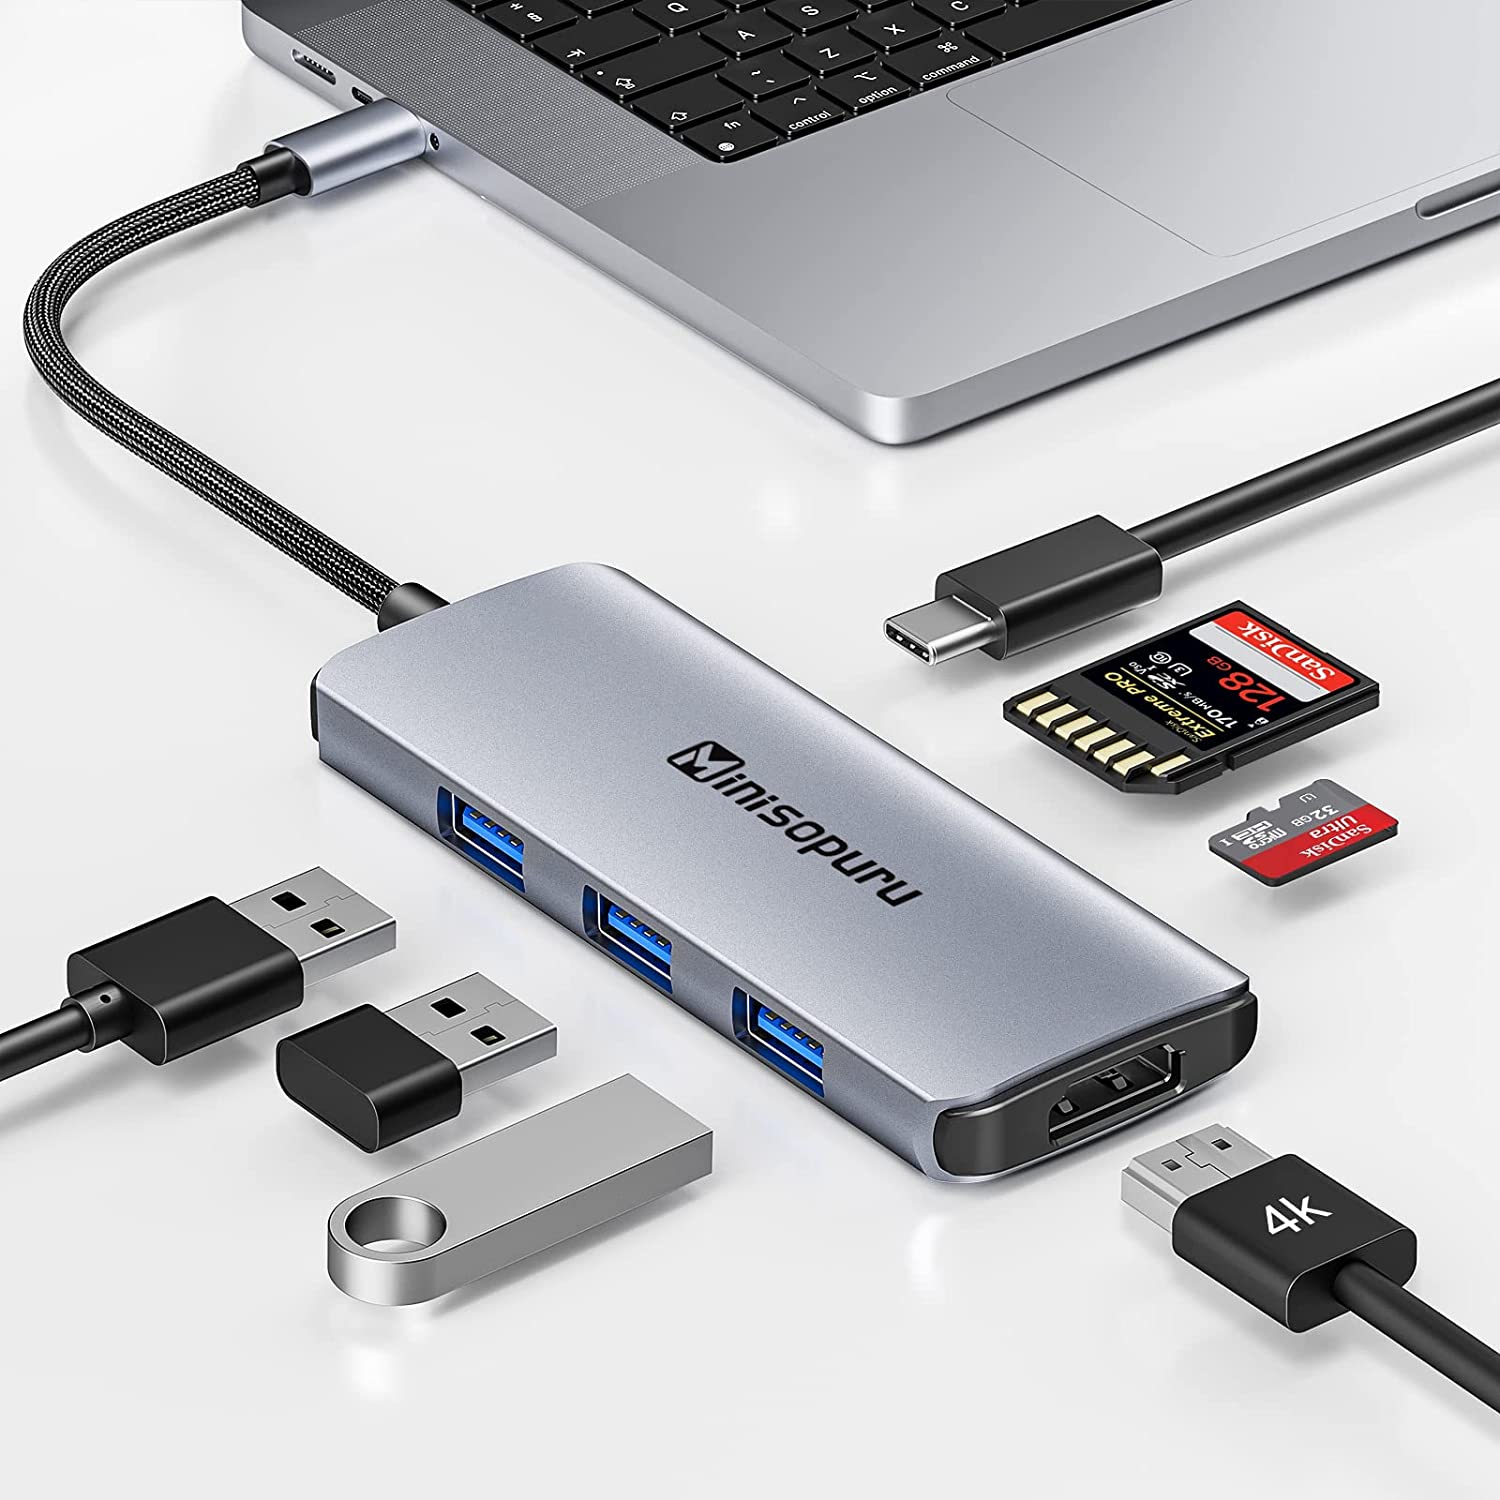 How to resolve your USB C HUB doesn't work?